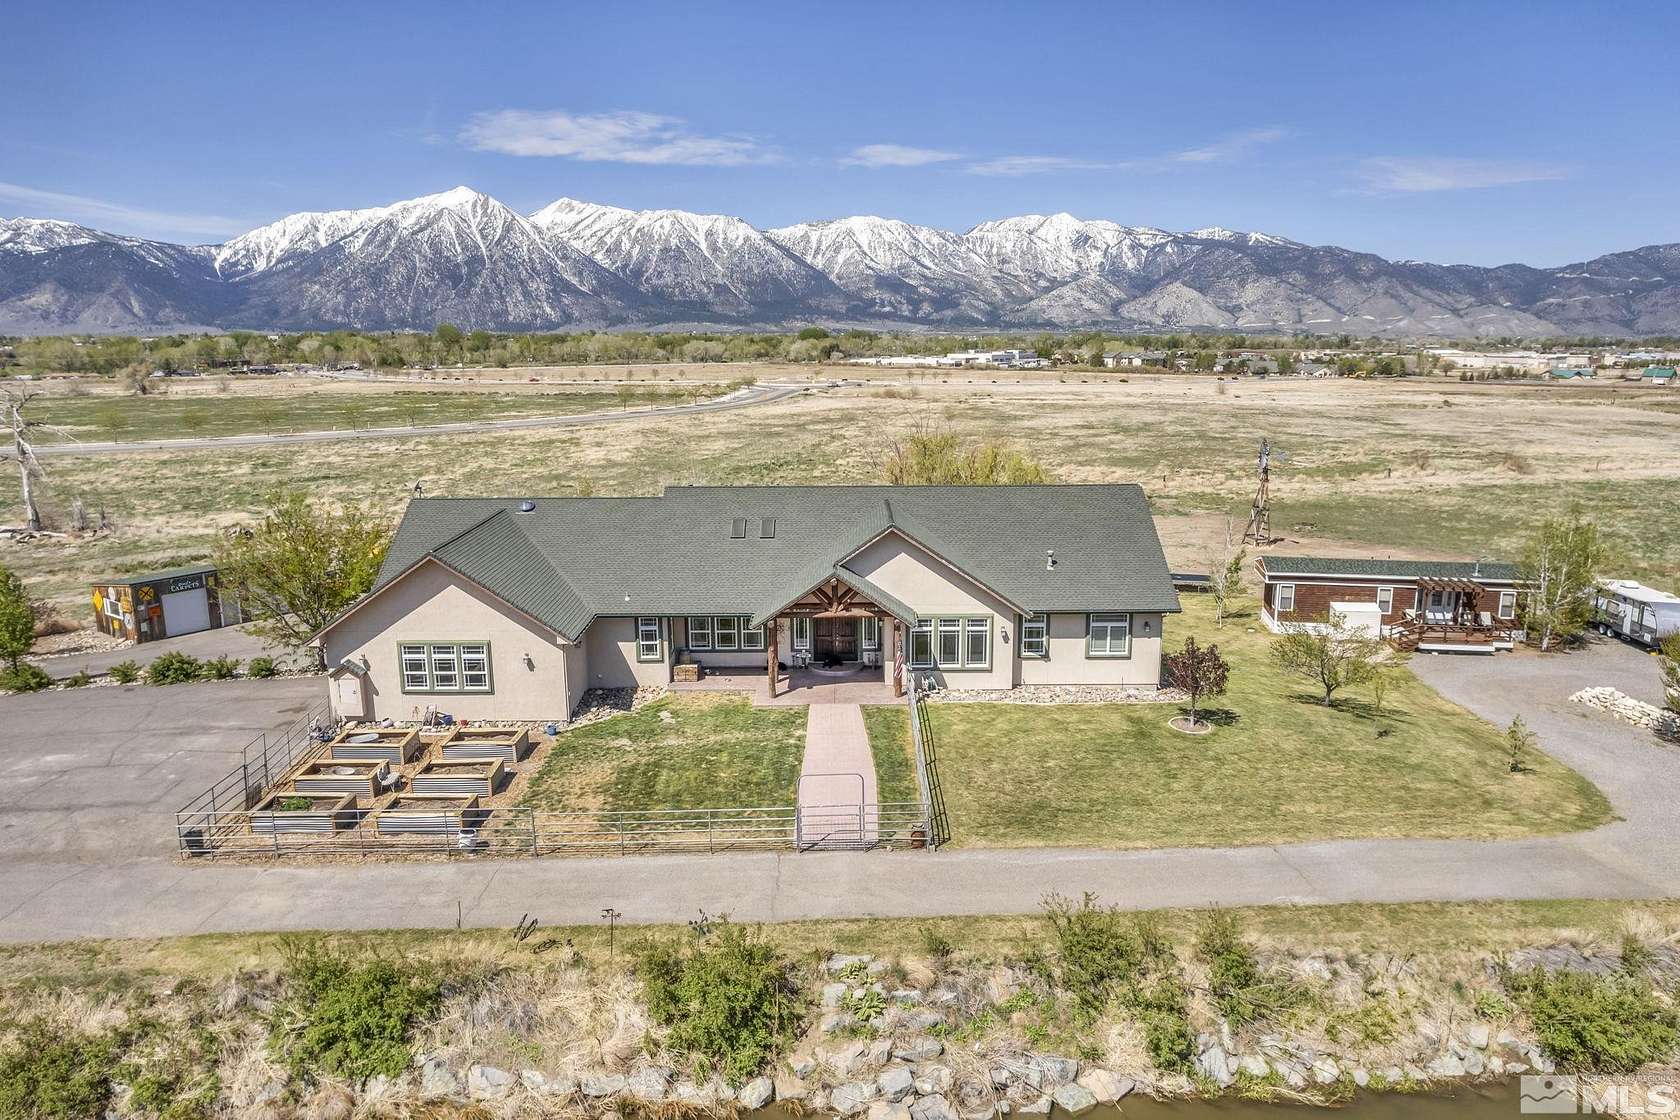 27 Acres of Land with Home for Sale in Gardnerville, Nevada